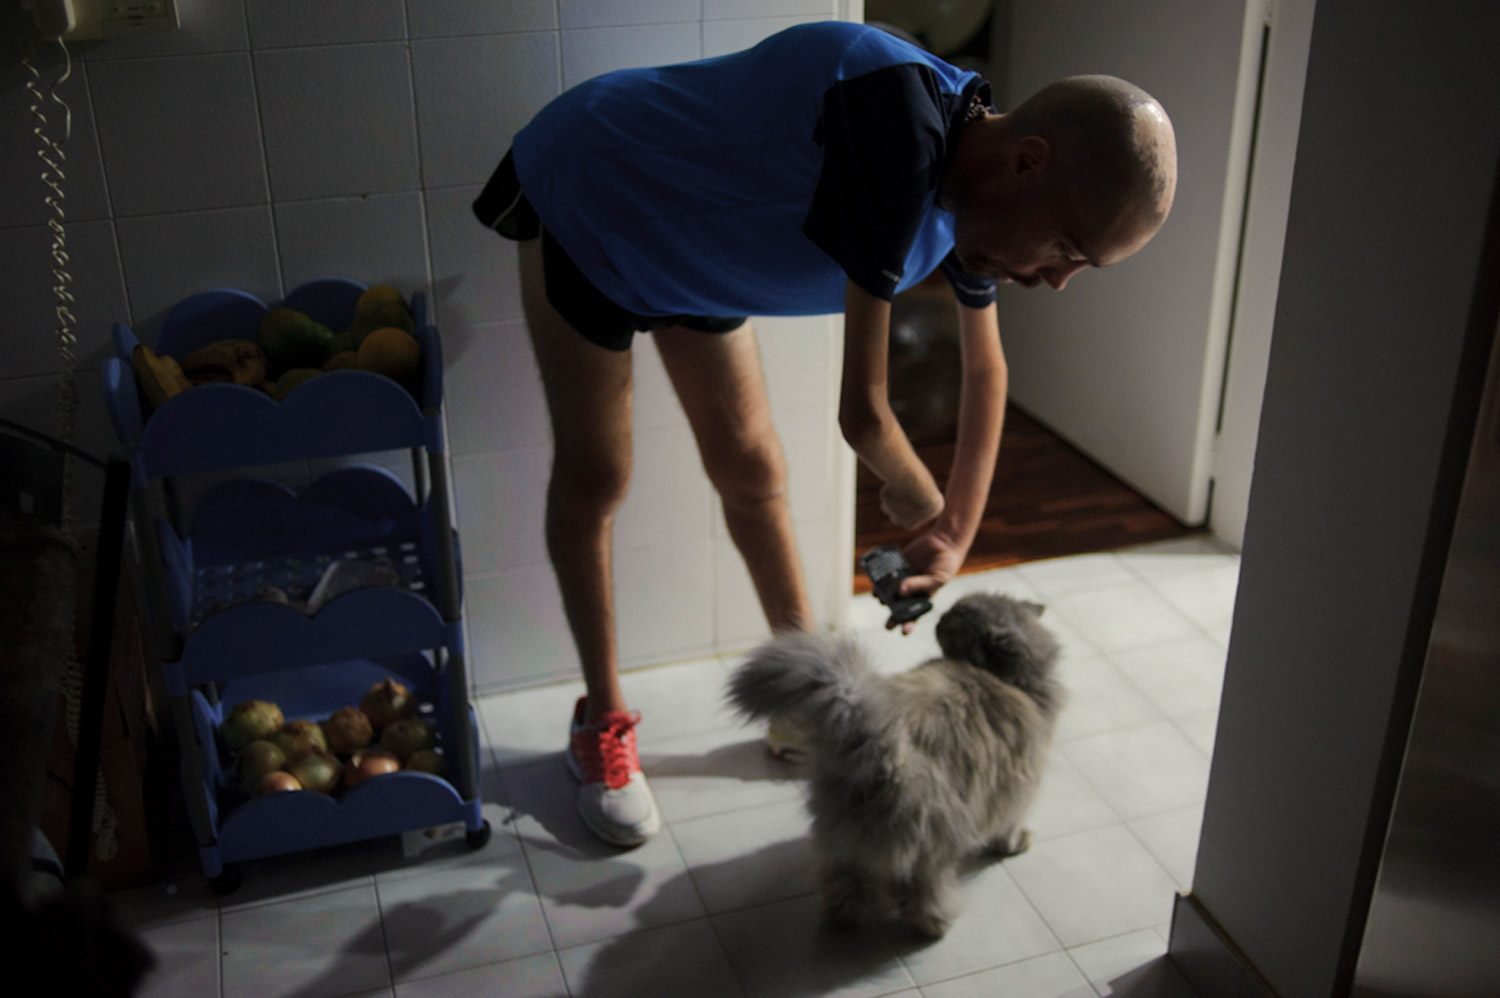 Melamed at his parents' house with his cat Duquesa in September 2011.